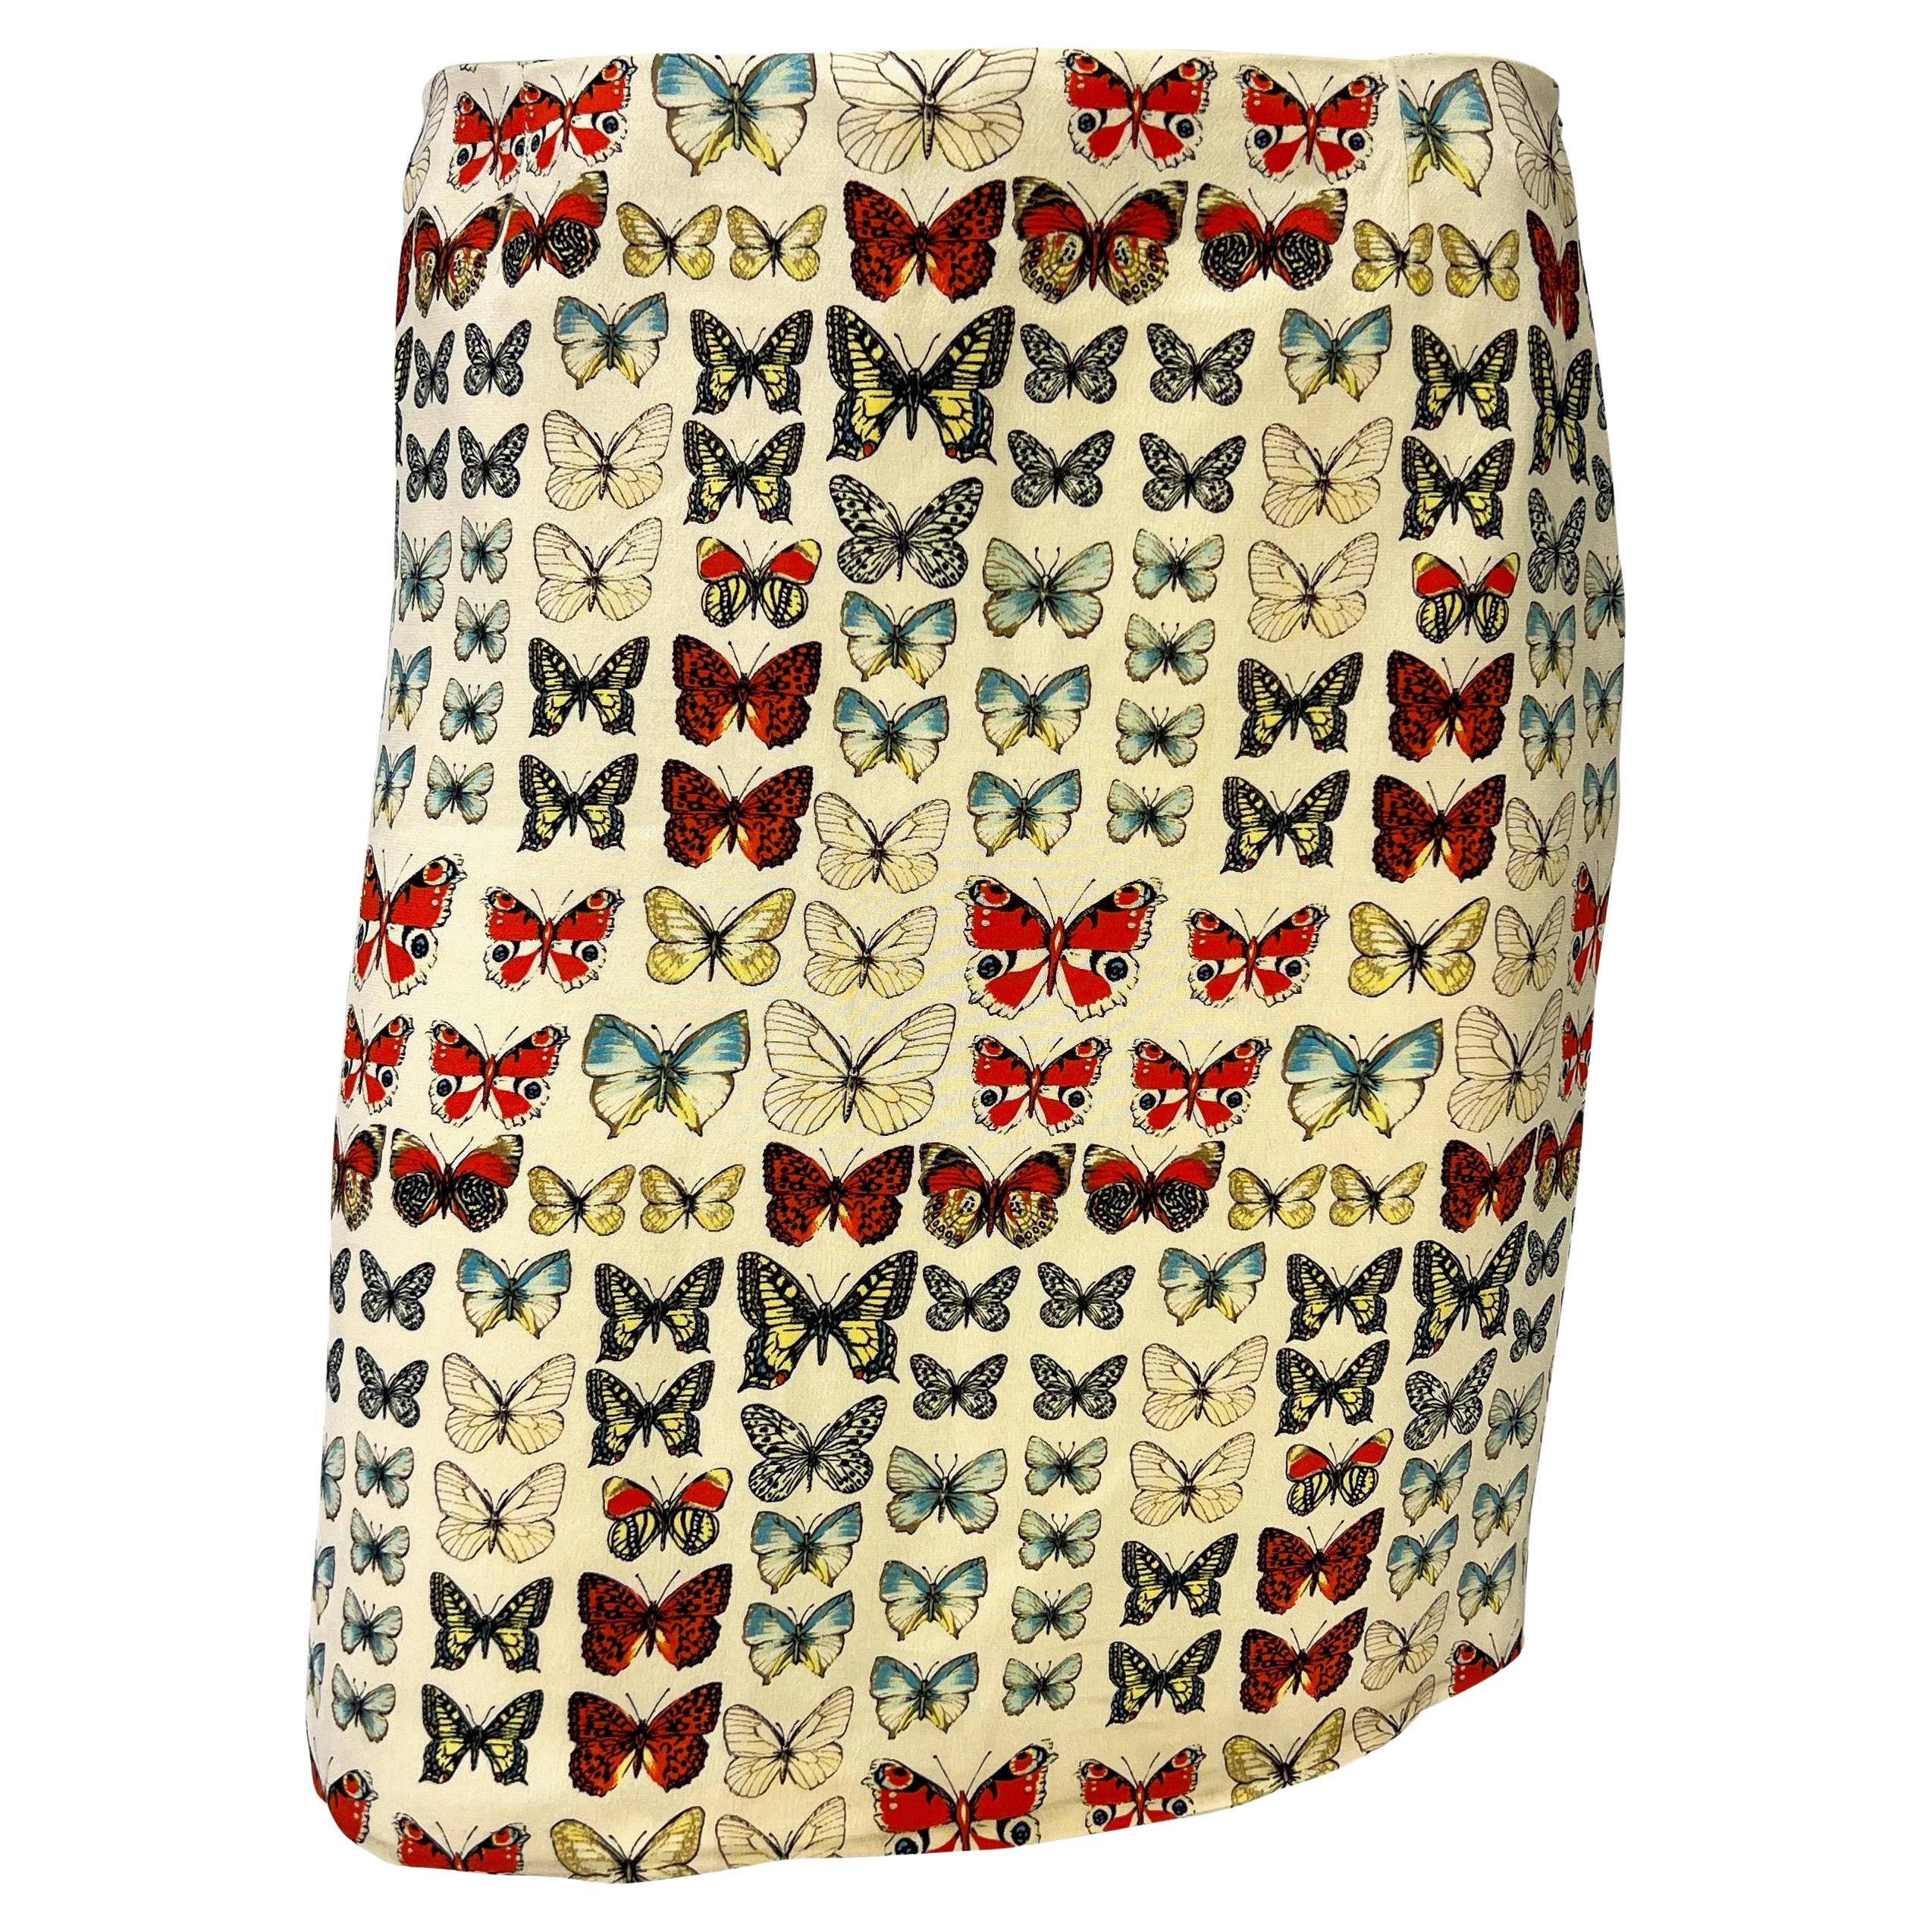 S/S 1995 Gianni Versace Couture Butterfly Moth Print Cream Mini Skirt For Sale